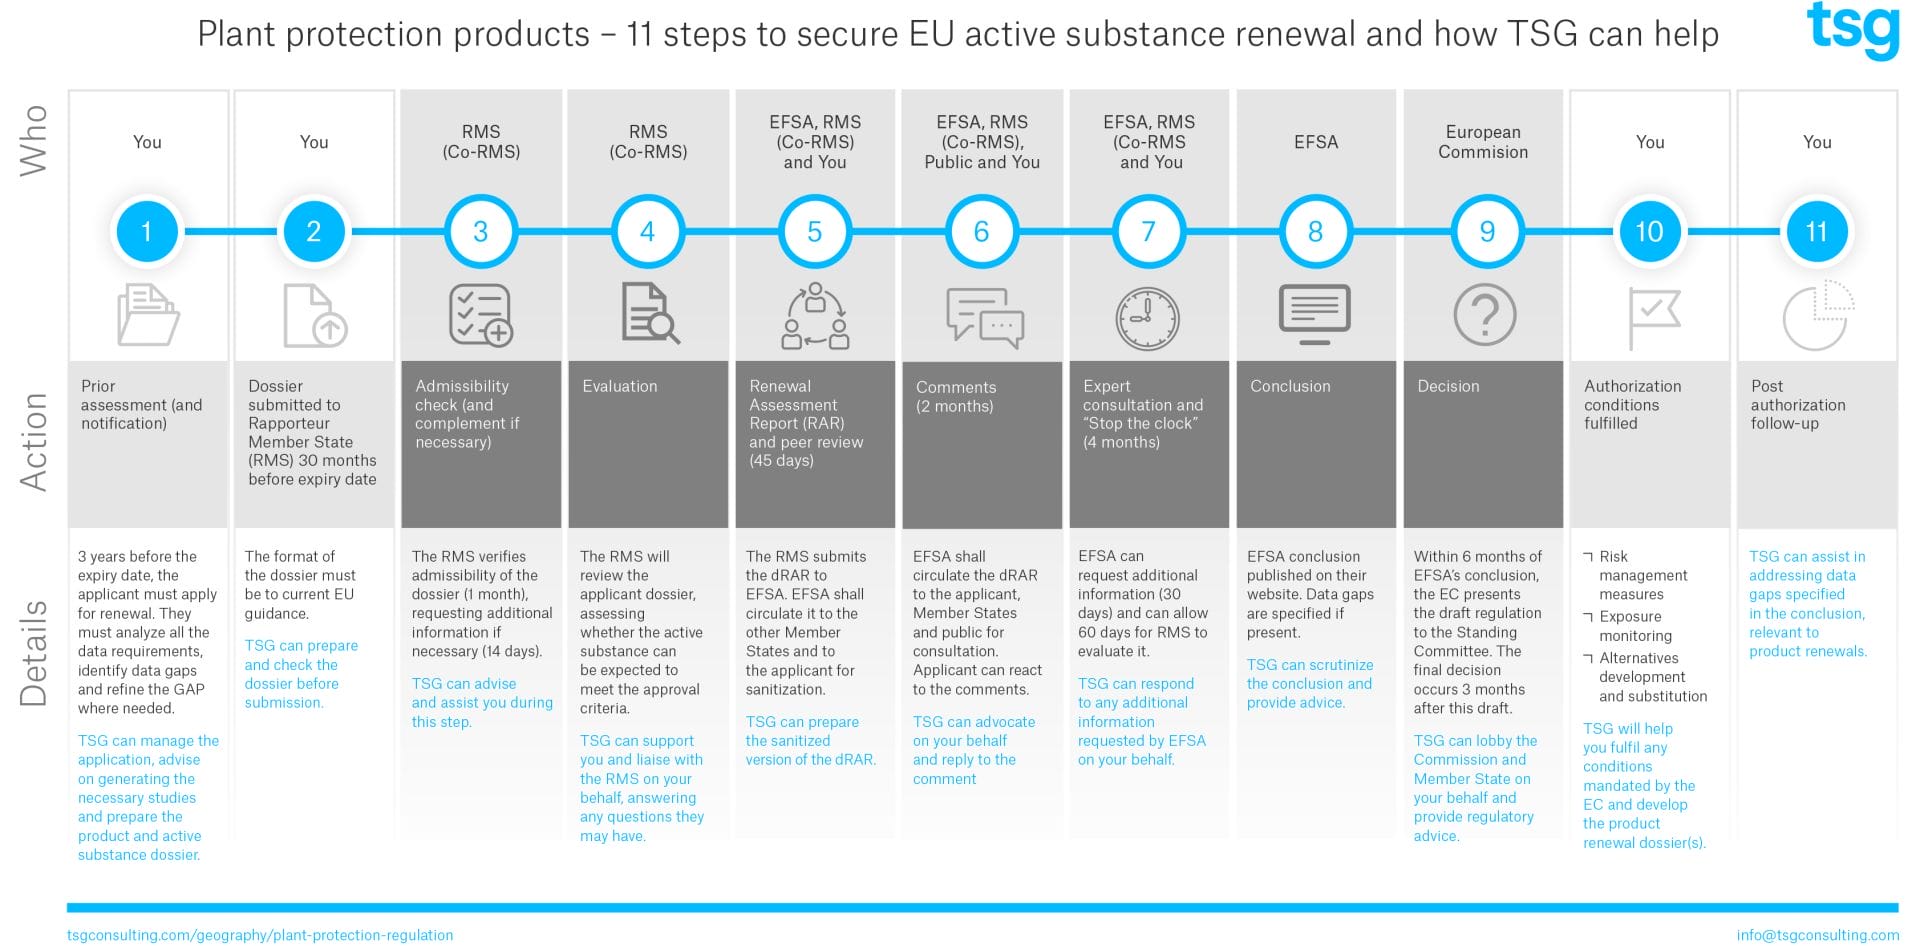 Plant Protection Products - 11 steps to secure EU active substance renewal and how TSG can help